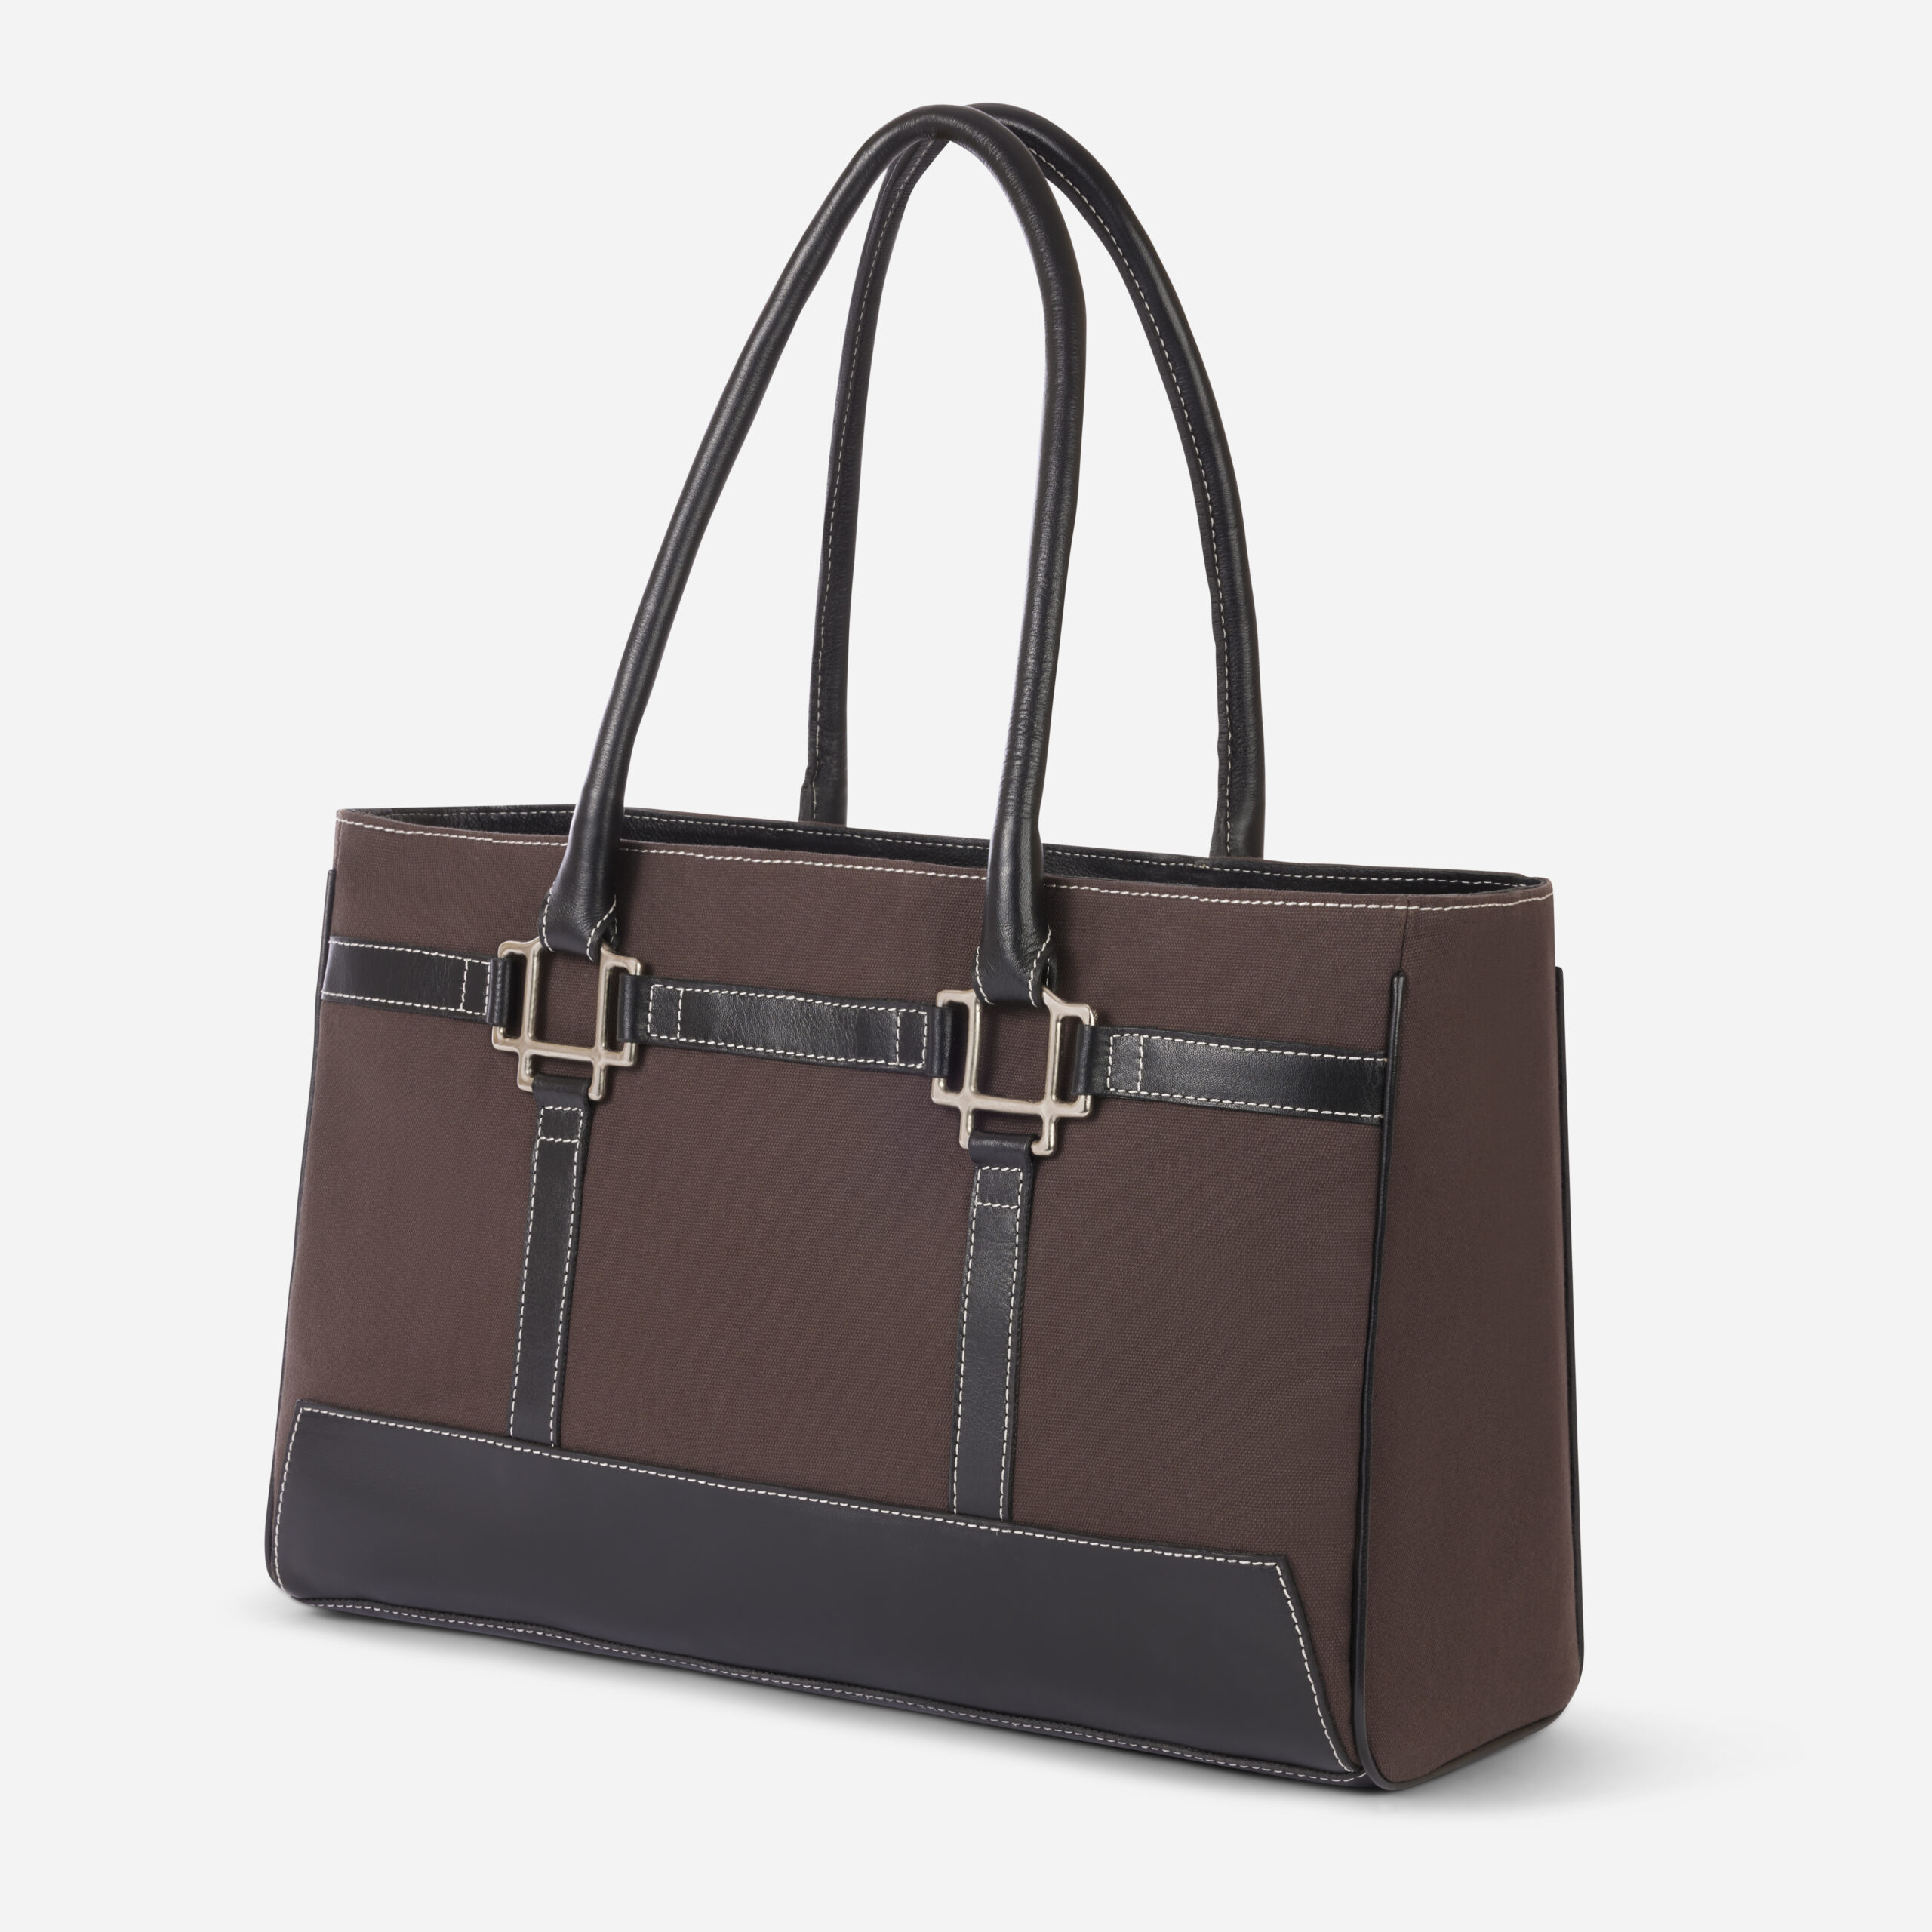 Derby Work Tote by Oughton for Mother's Day